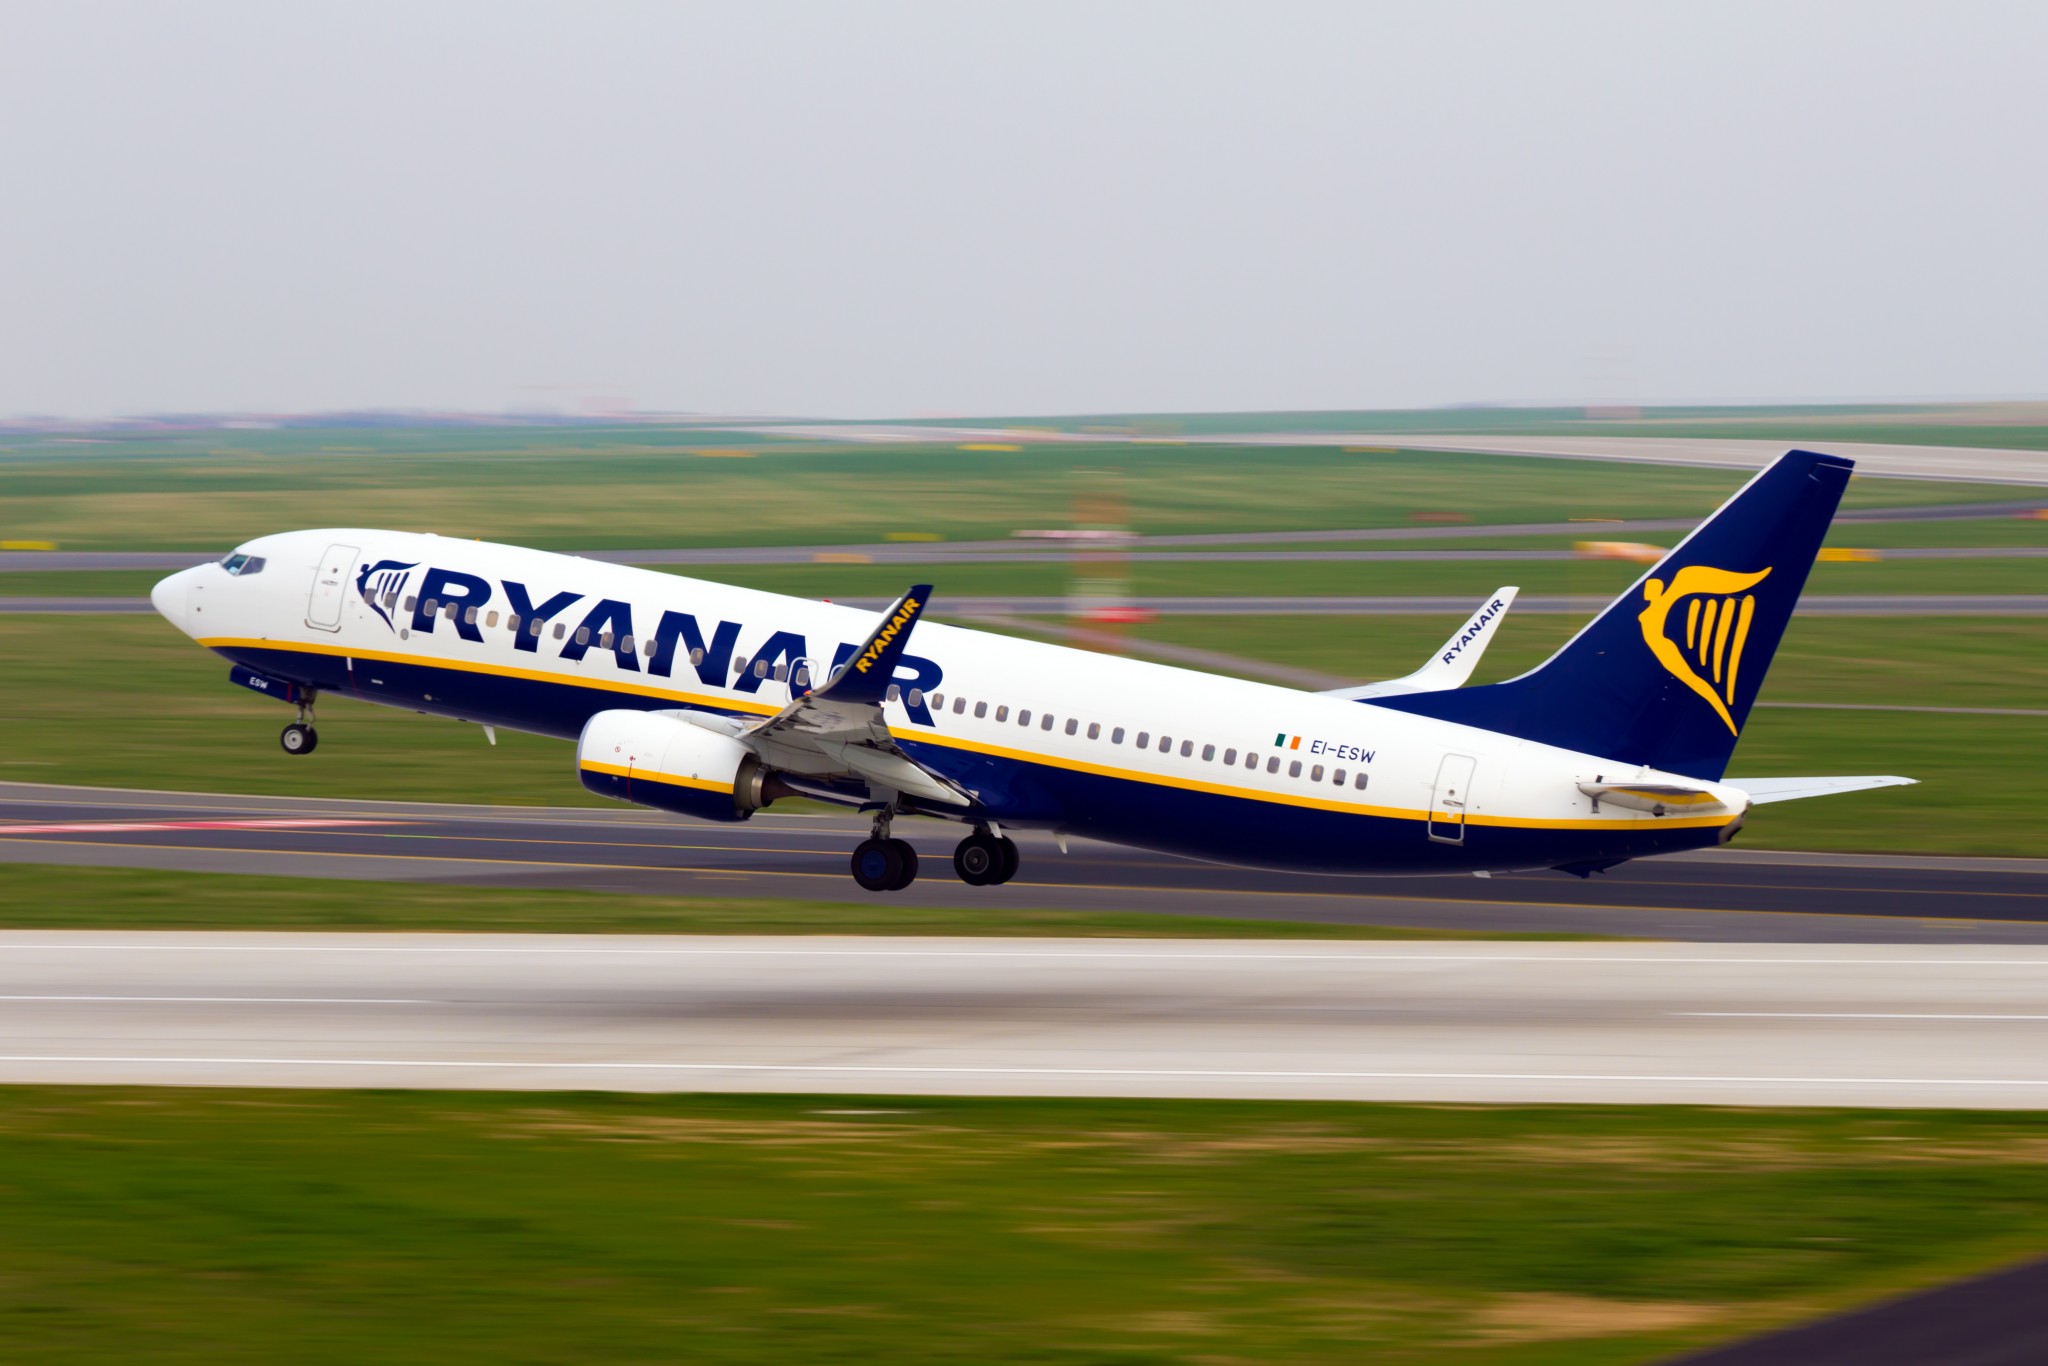 Ryanair hails 6 million passengers and two decades Newcastle operational launch